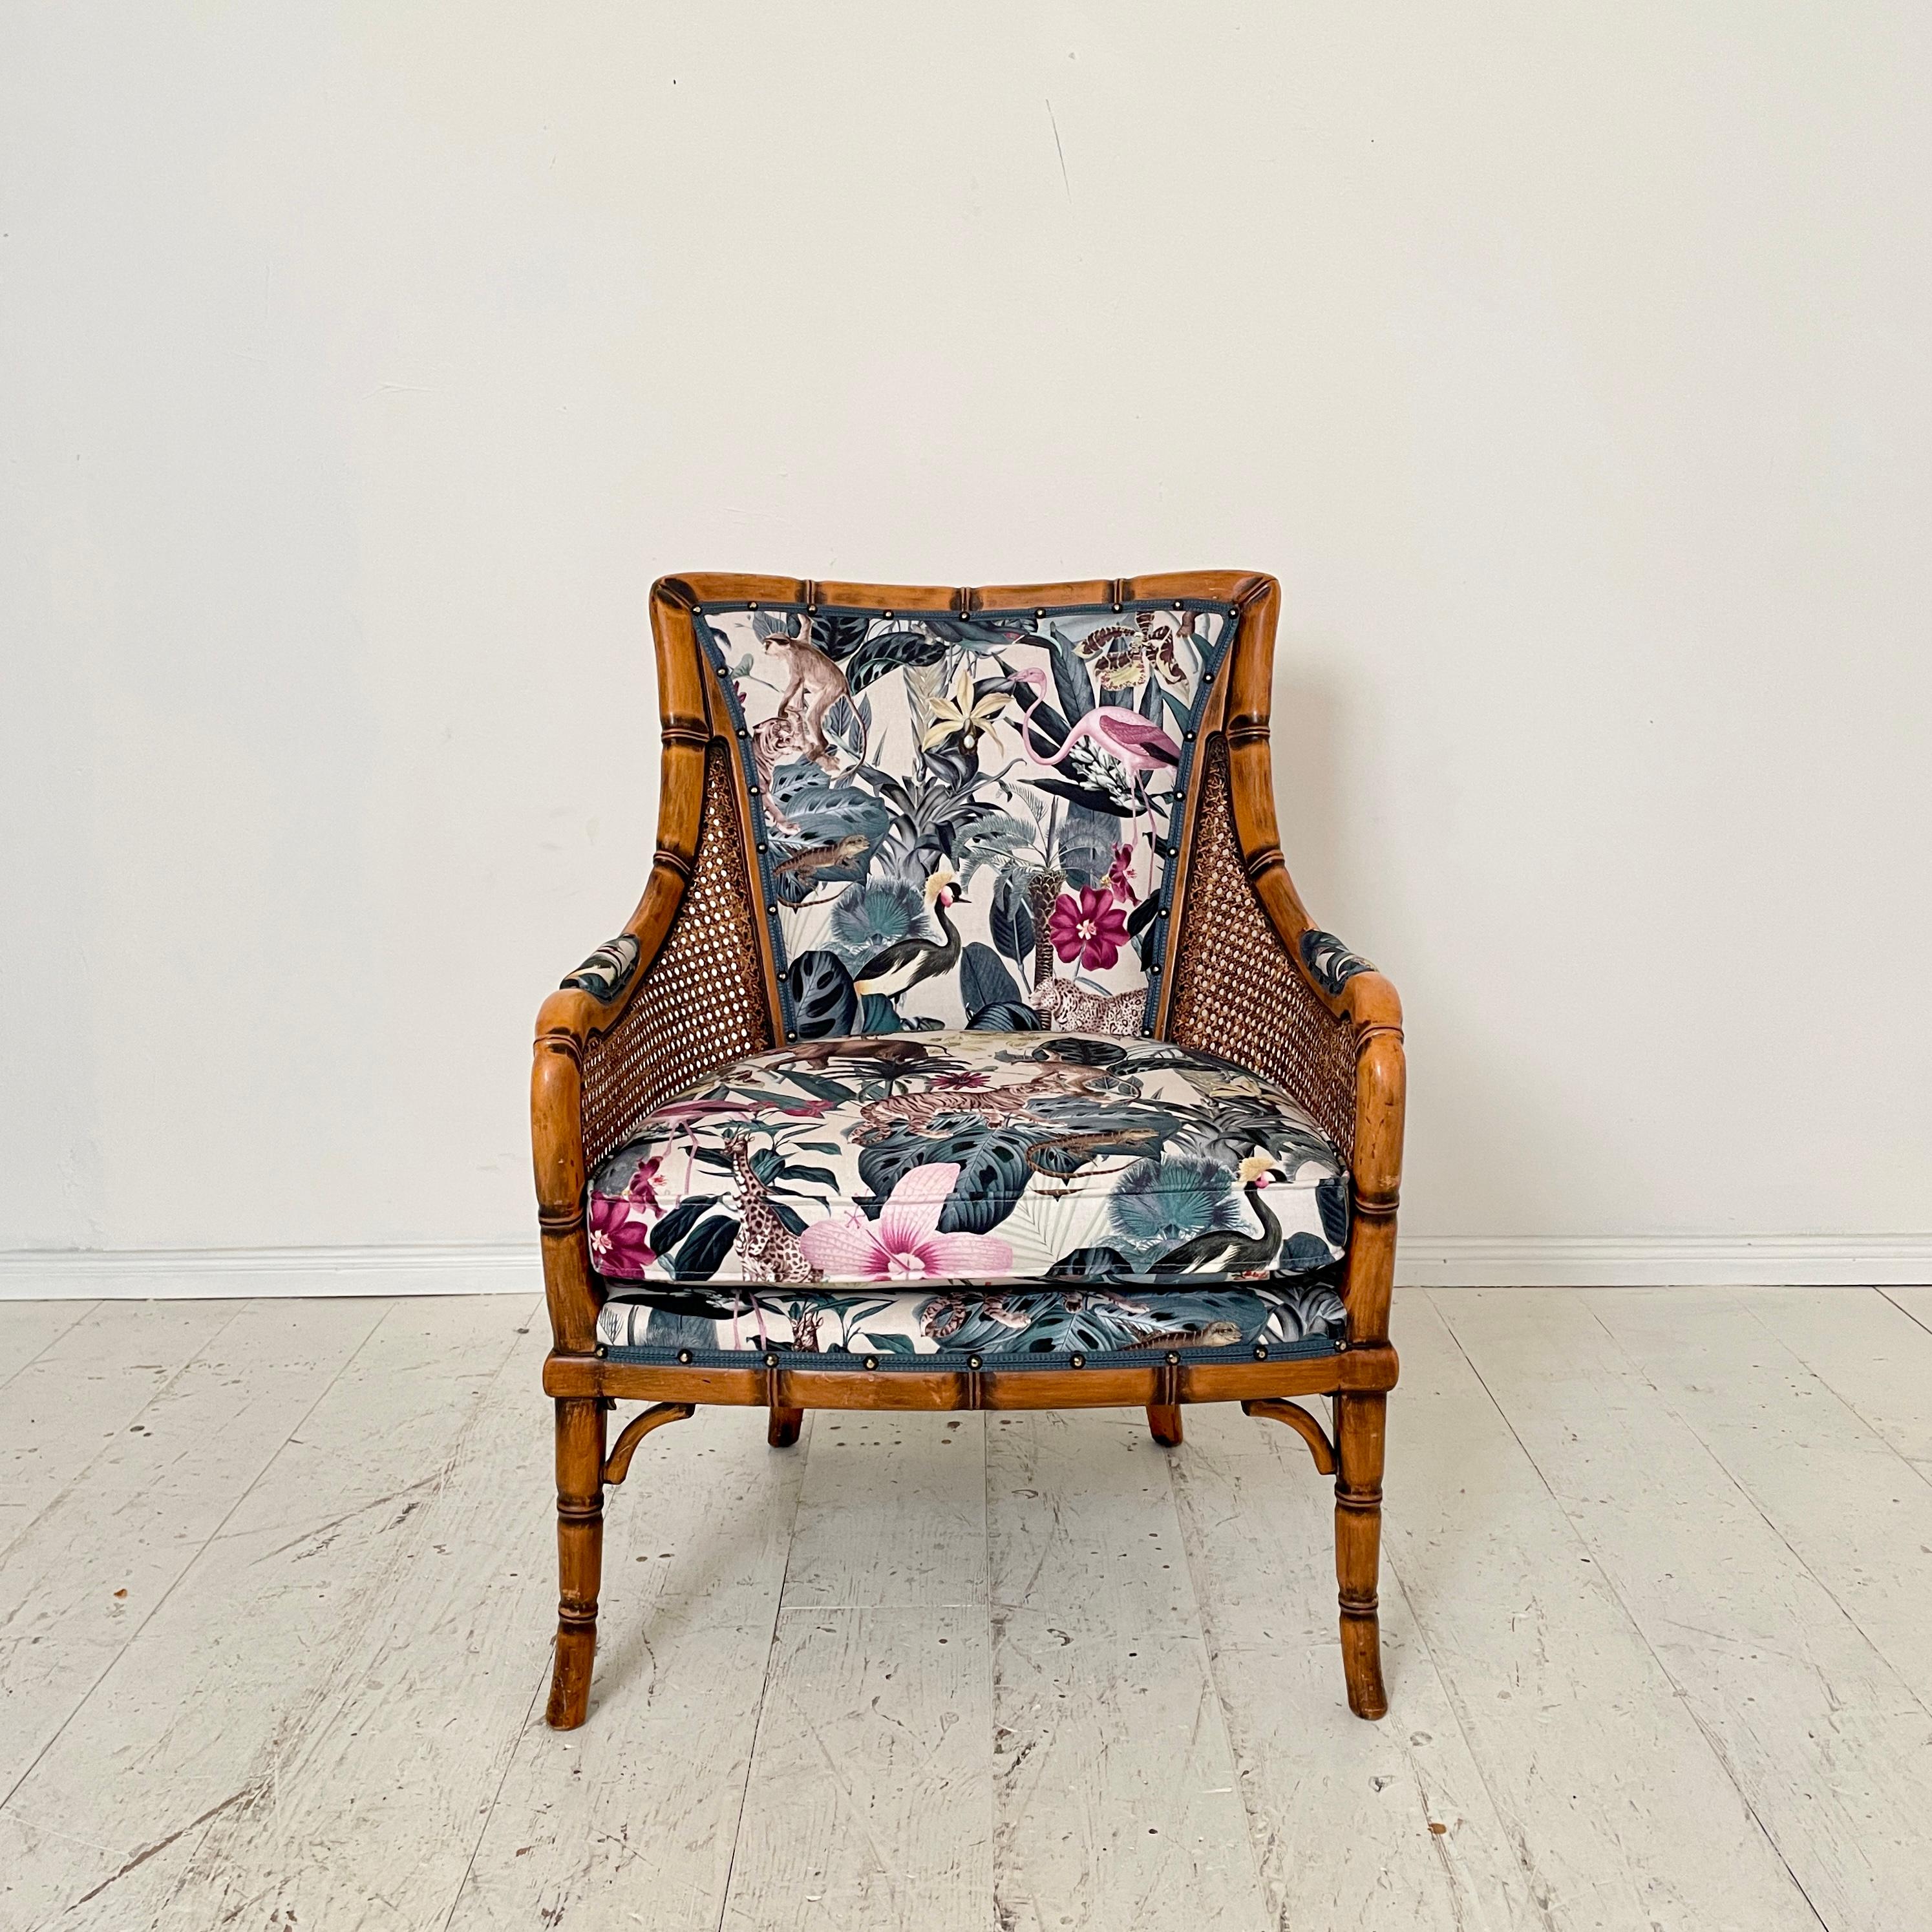 This beautiful Mid-Century French Armchair in Bamboo Style with Animal Print Fabric was made in the 1970s.
A unique piece which is a great eye-catcher for your antique, modern, space age or mid-century interior.
If you have any more questions we are